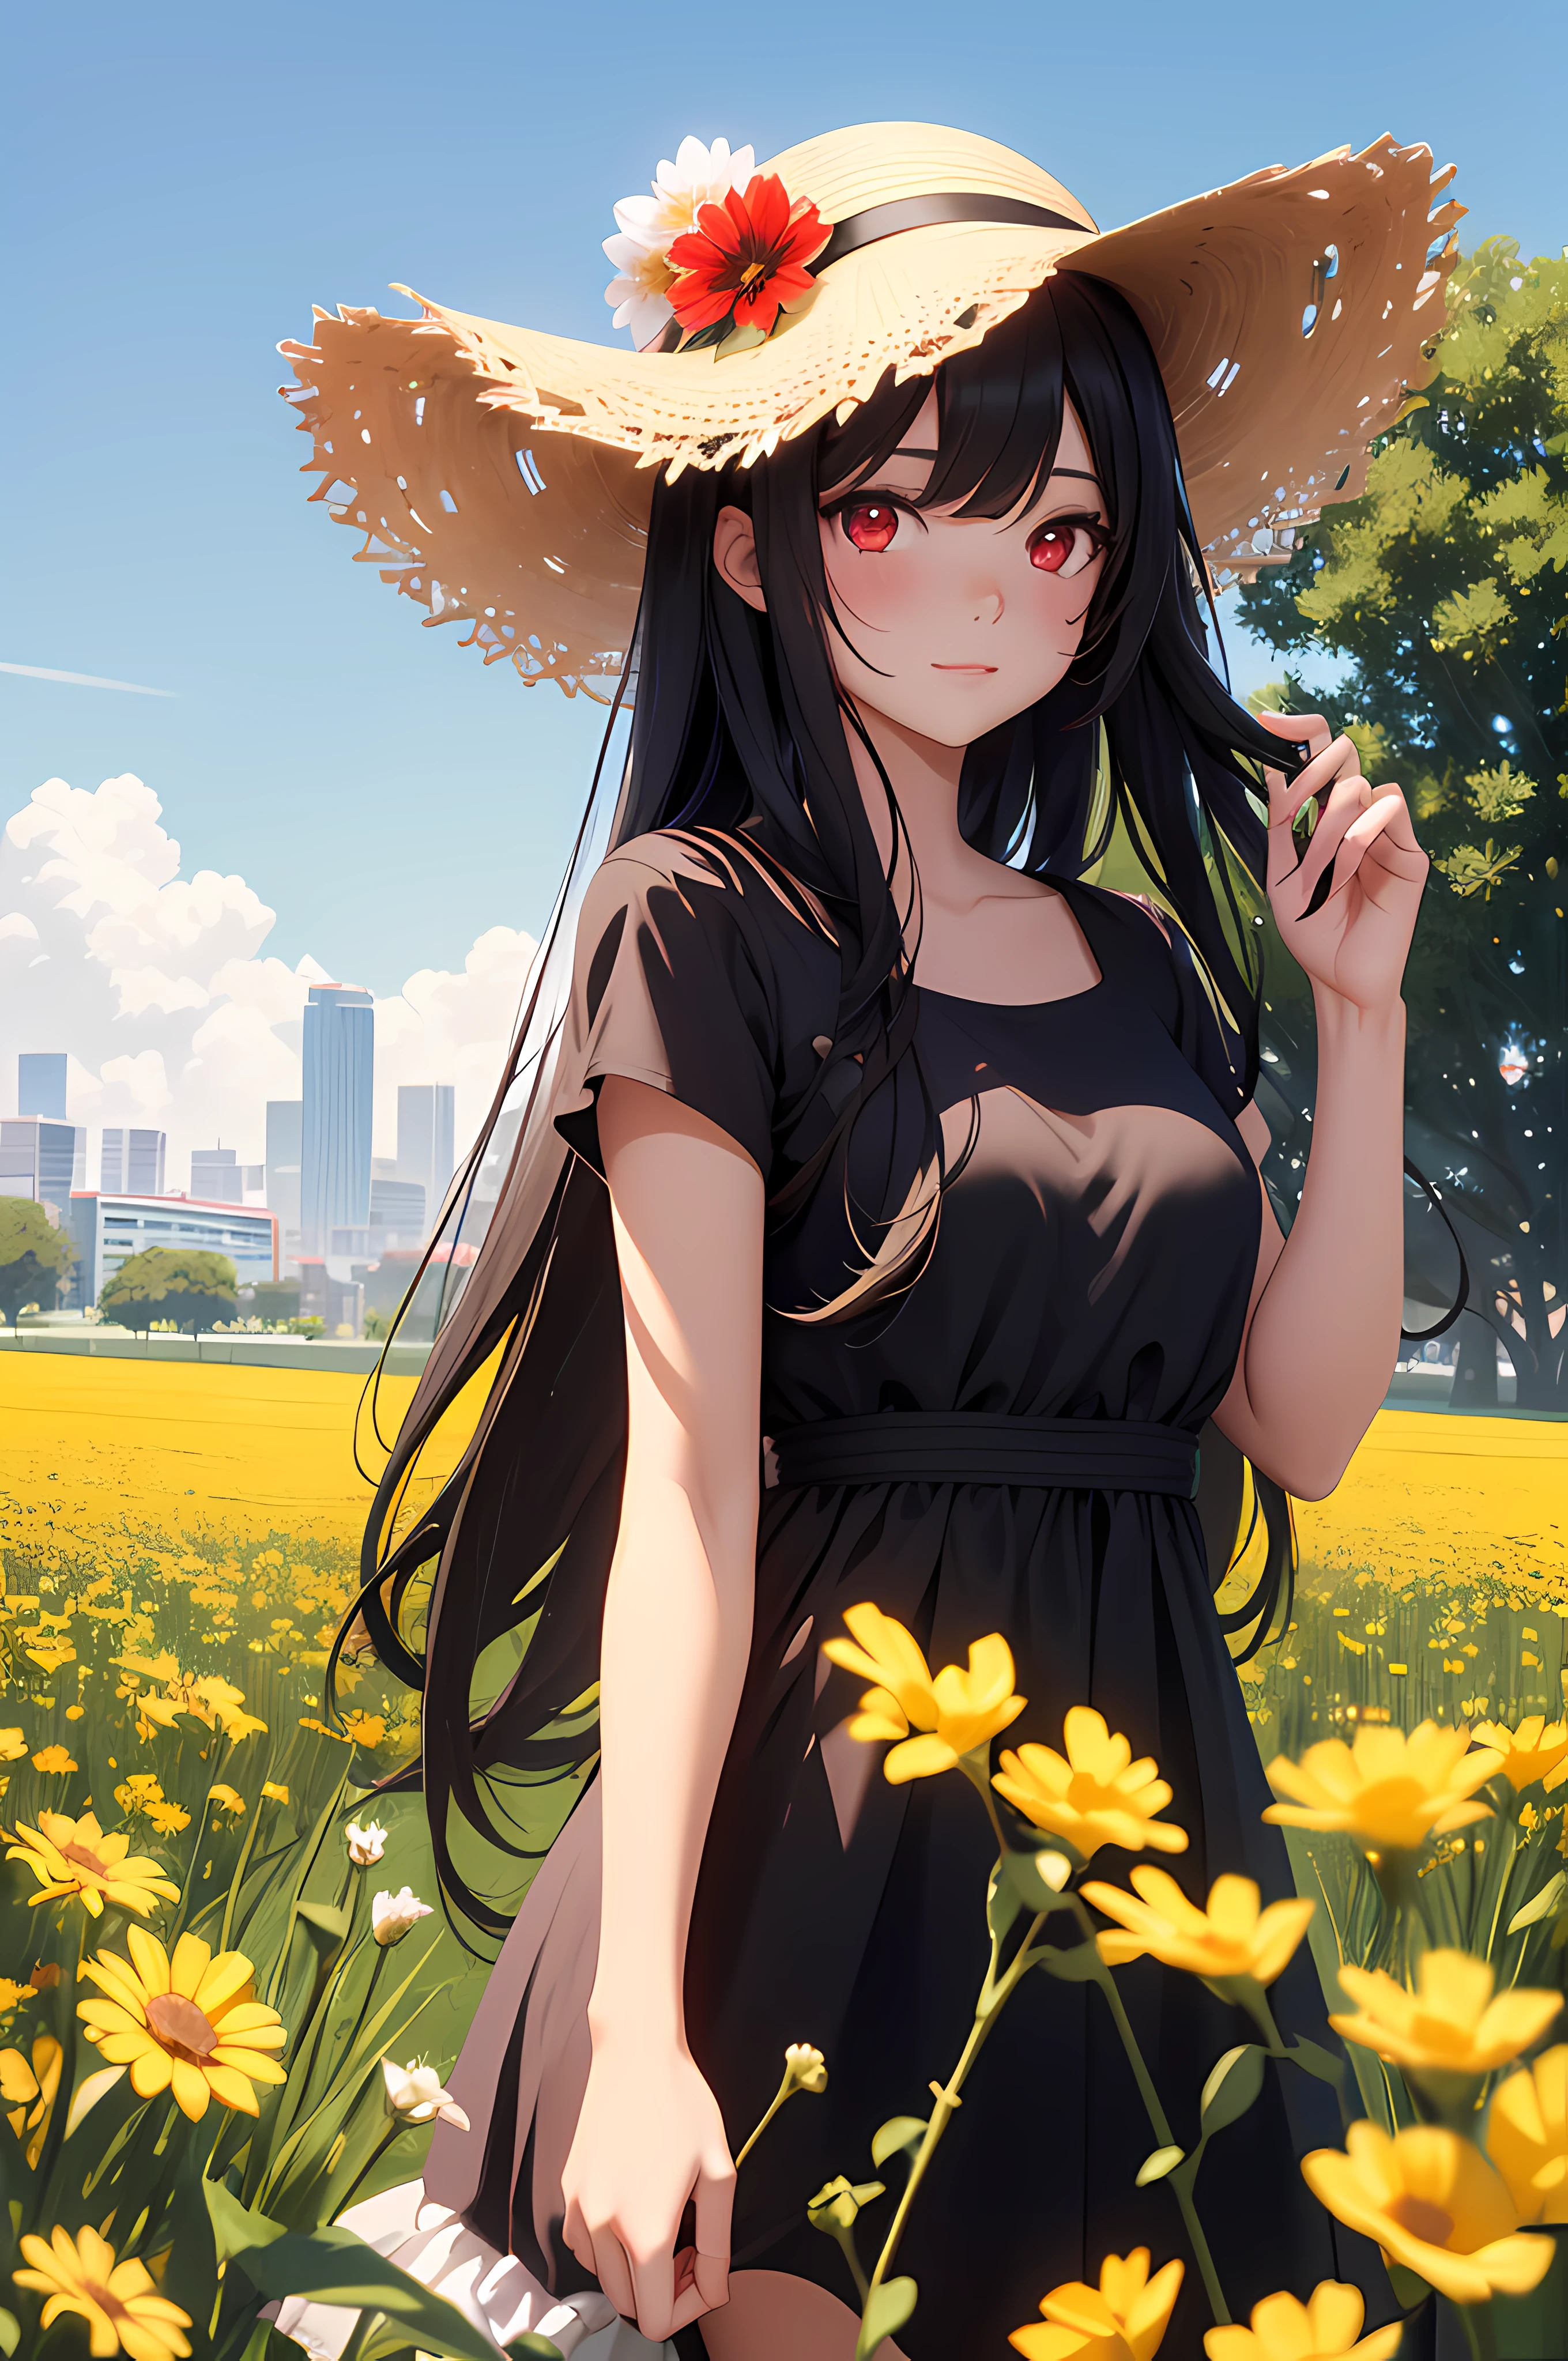 Teenage pretty Girl with Long Curly black Hair, red Eyes, Light Makeup – Wearing cute straw hat – Posing in a Sunny Flower Field – Soft Lens, Photorealistic Portrait Futuristic Female Android with Long black Hair and red Eyes – Wearing a lined black dress – Posing Against a Neon Cityscape Background – Hyper-Realistic 4k Digital Art volumetic lighting Wearing a White Linen Sundress – Posing in a Sunny Flower Field – Soft Lens, Photorealistic Portrait  Wearing a White Linen riot dress – Posing in shadow – Soft Lens, Photorealistic Portrait